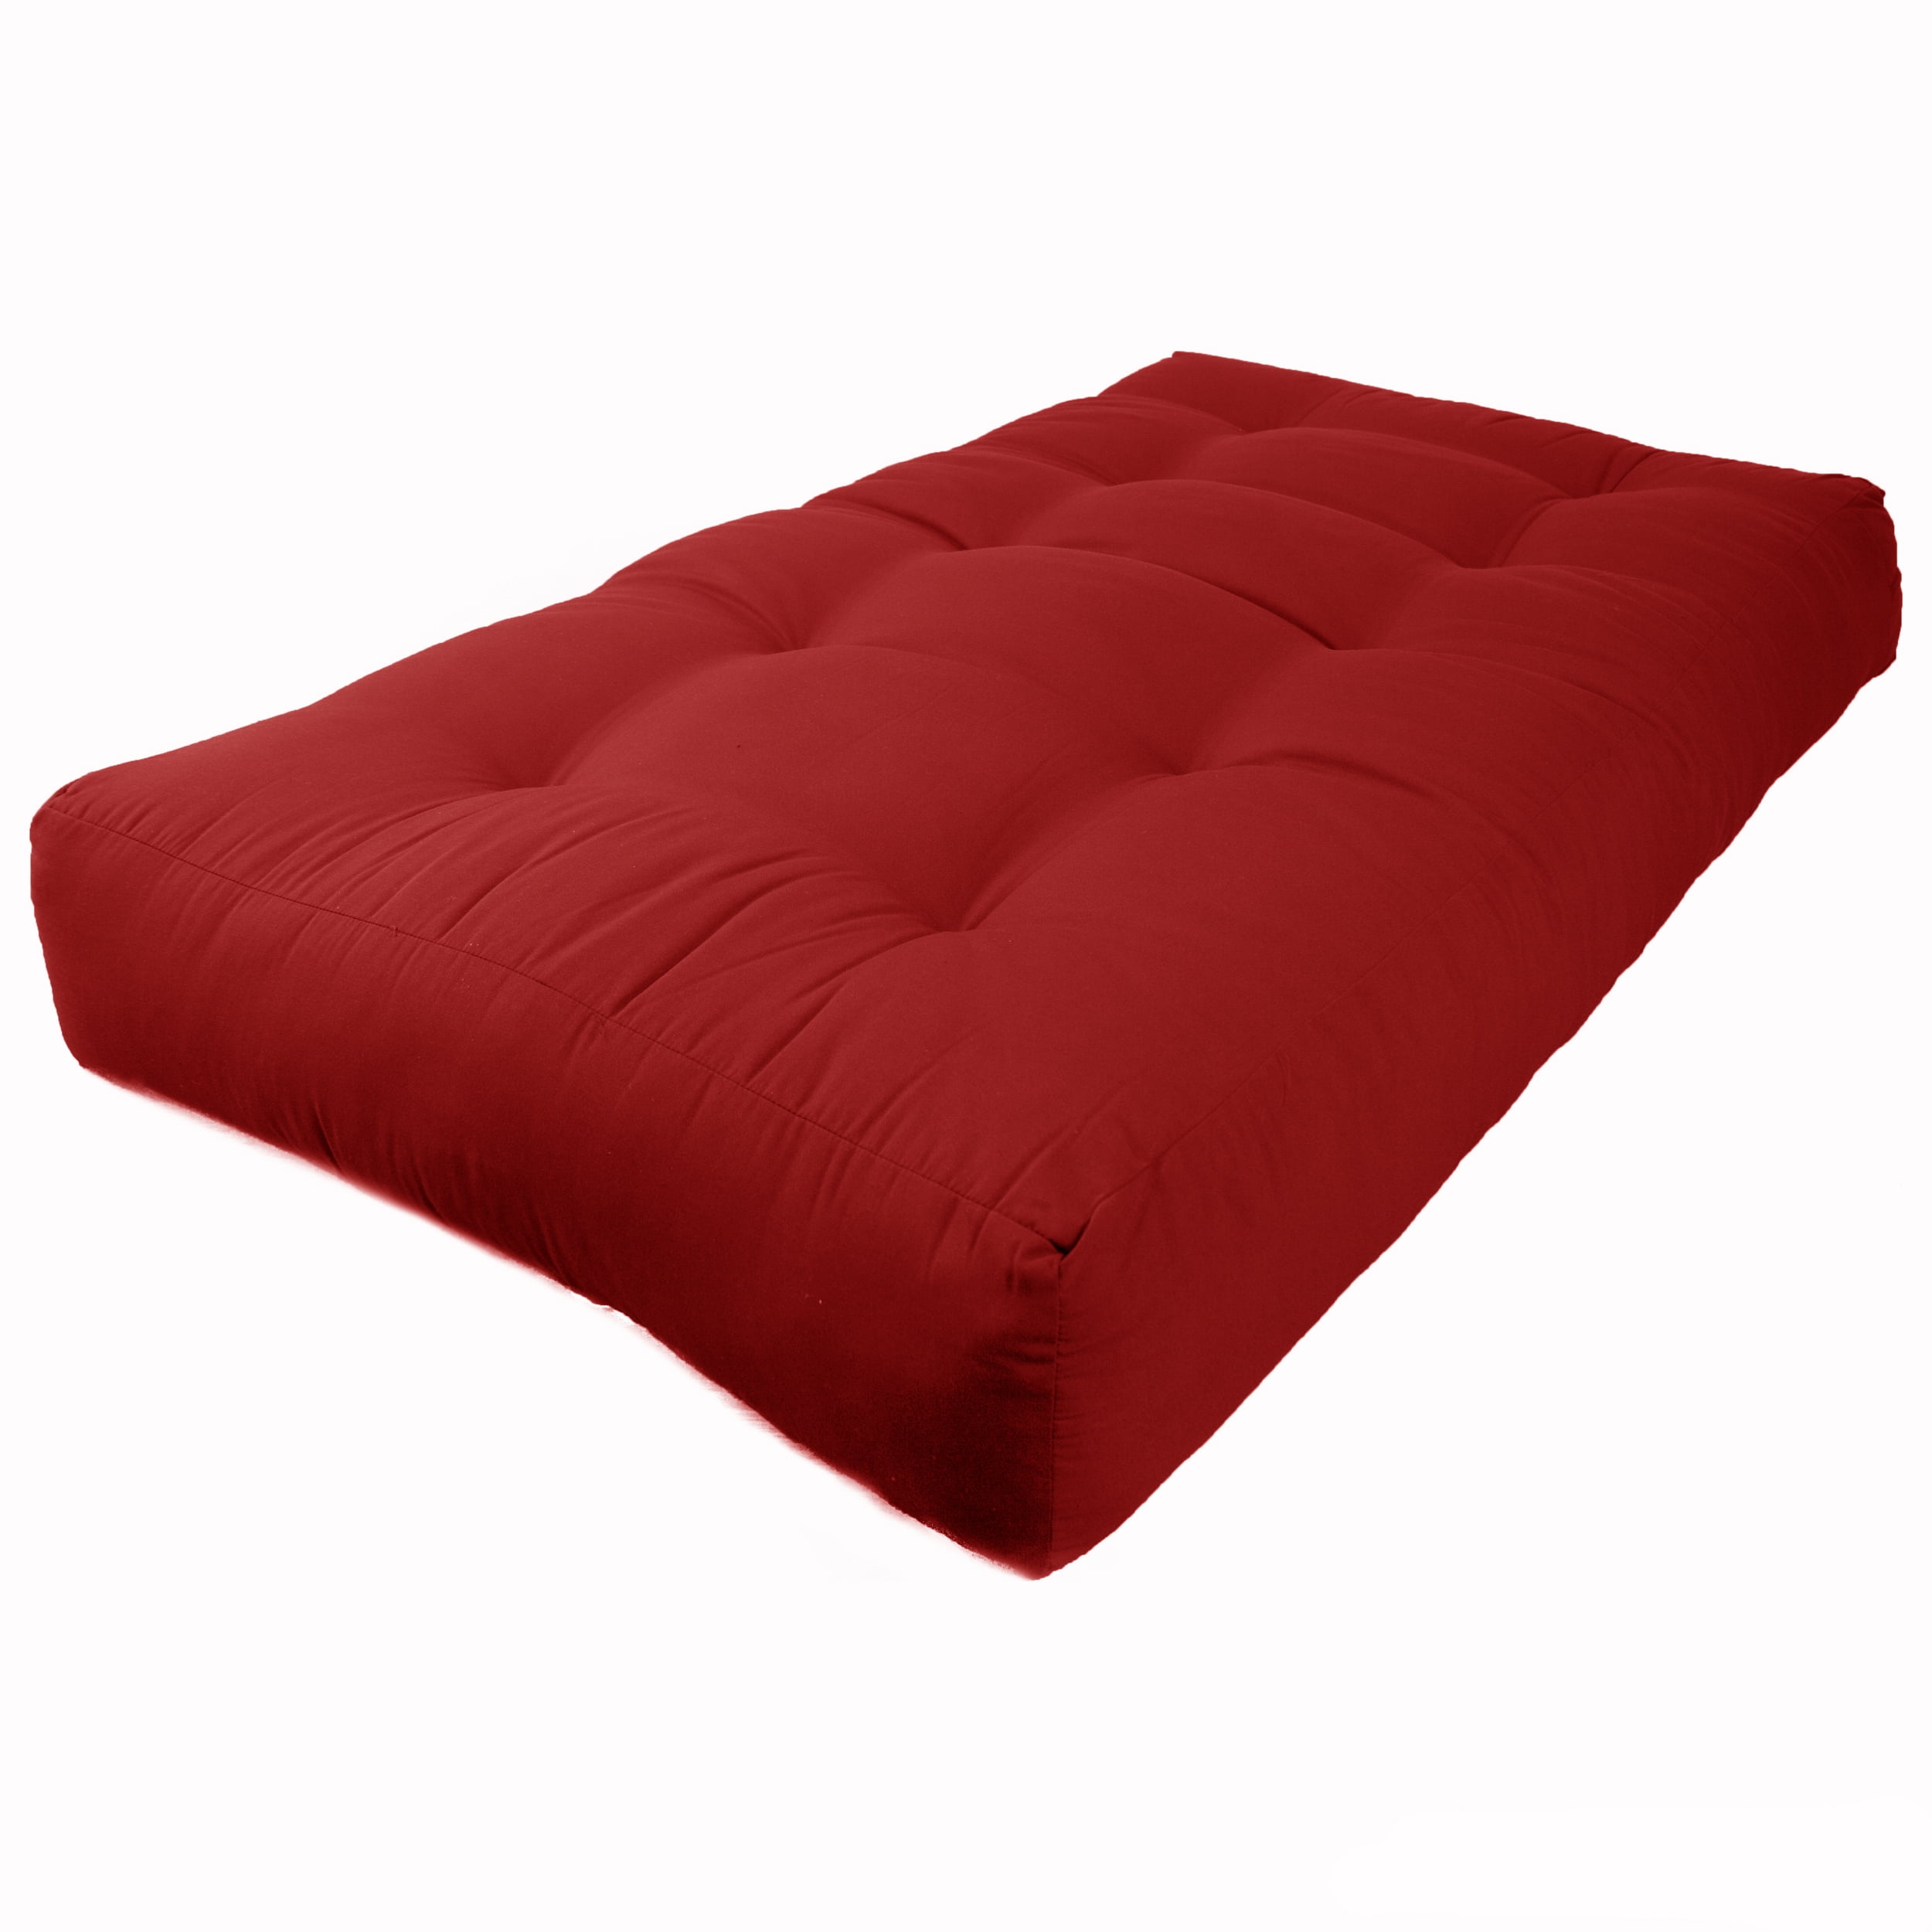 Picture of Blazing Needles 9602-B-TW-RR 9 in. Renewal Twill Twin Size Futon Mattress, Ruby Red